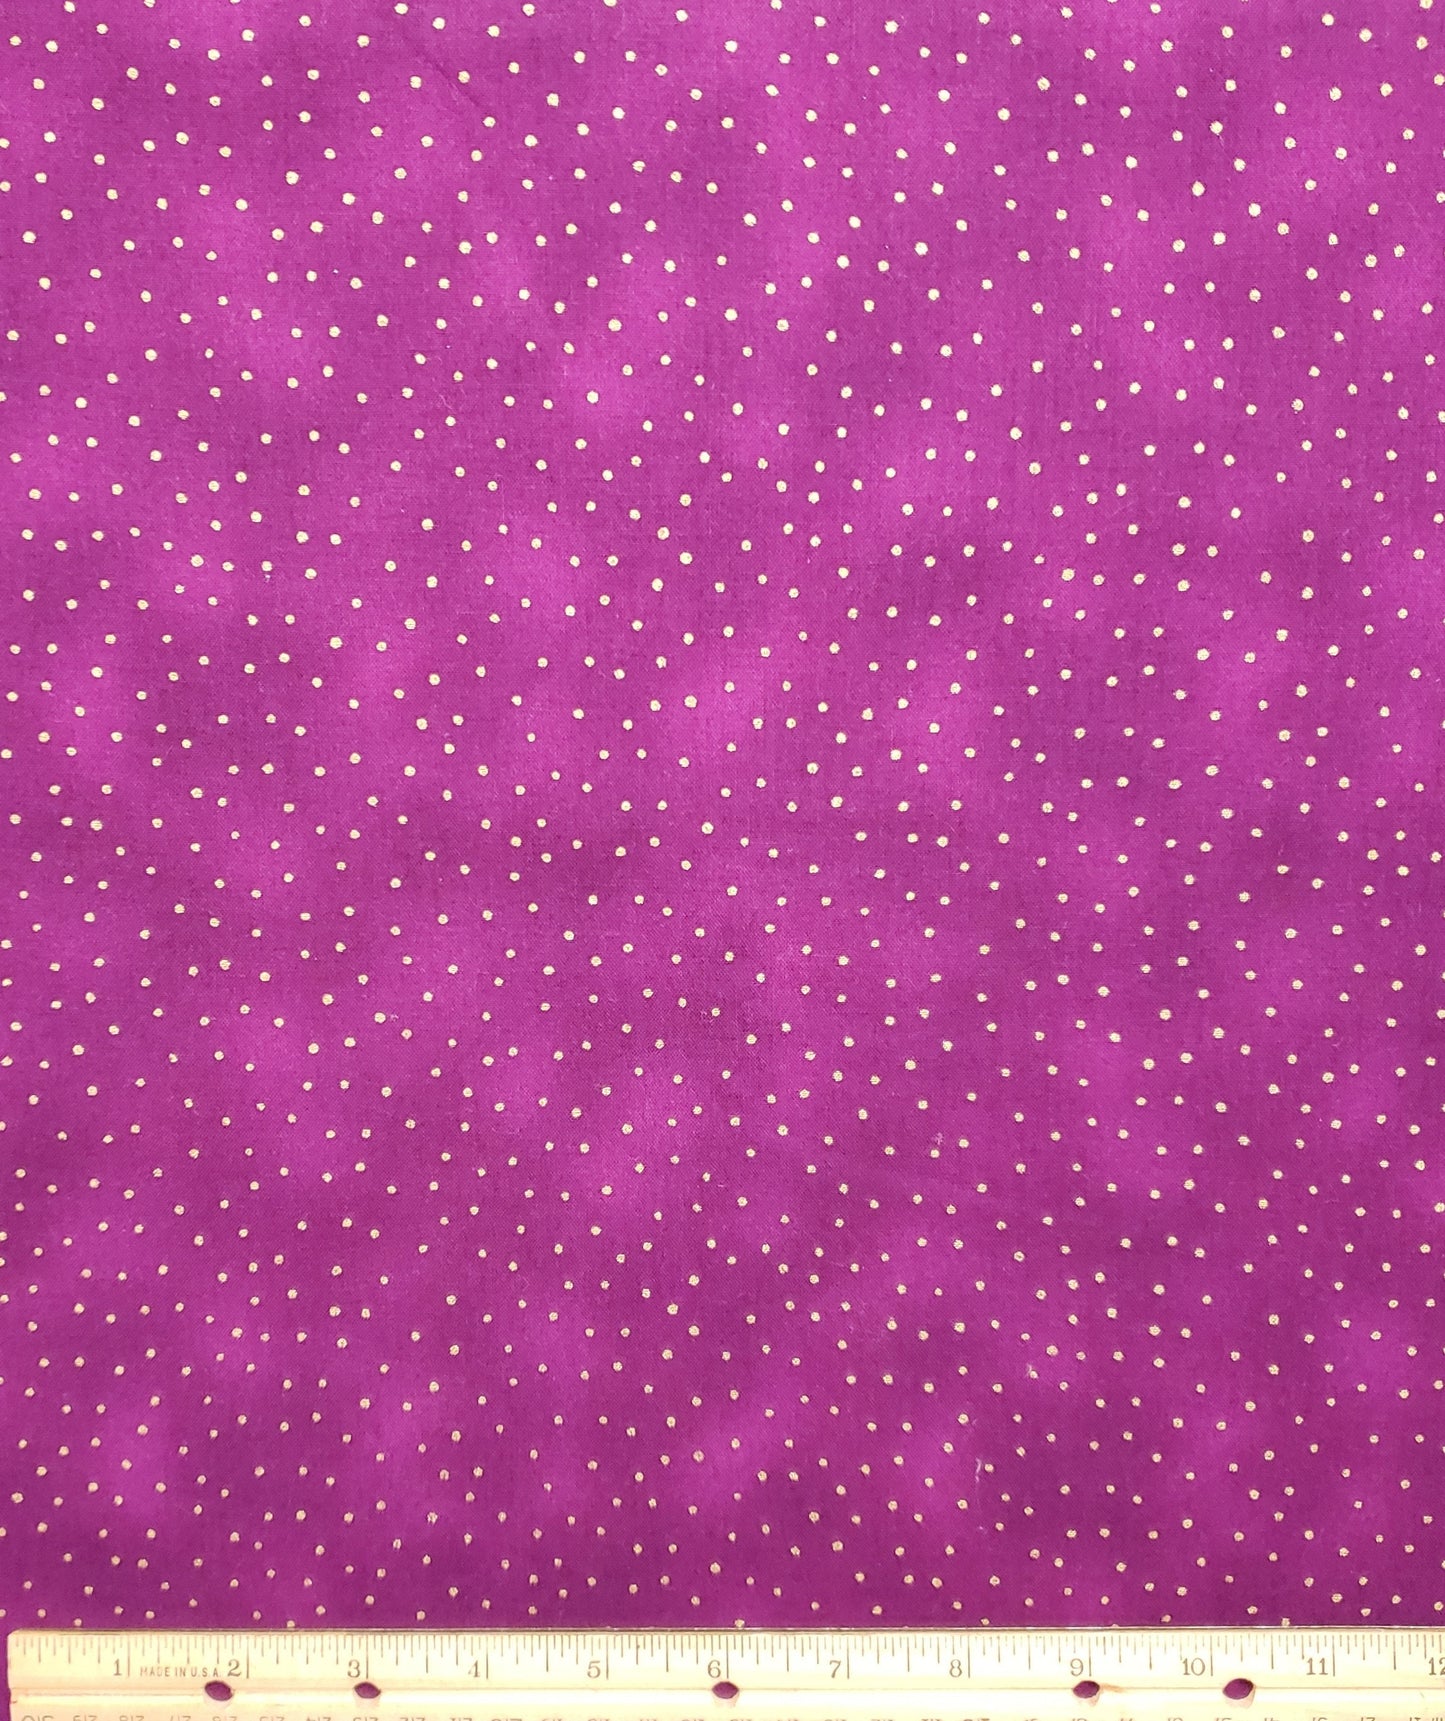 Luxury Blenders by P&B Textiles - Mottled Plum Fabric with Metallic Gold Dots